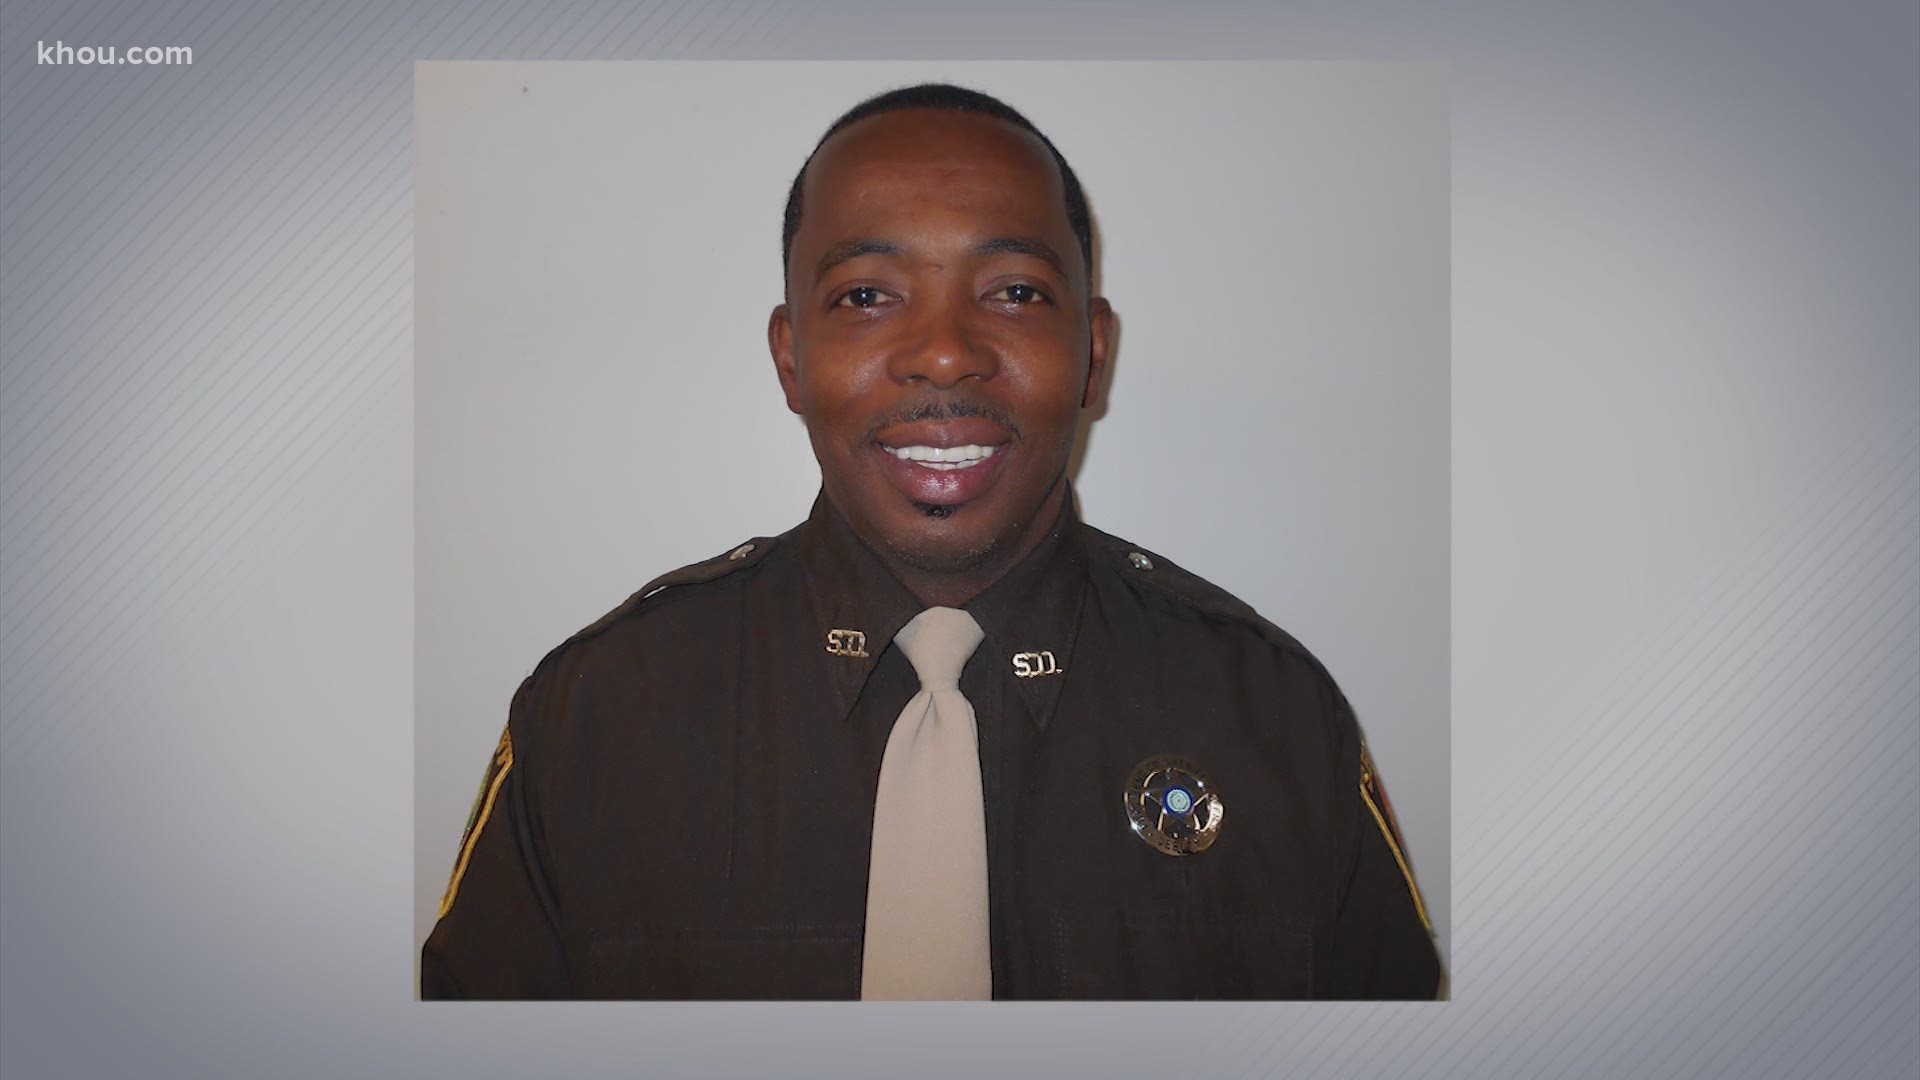 The Fort Bend County Sheriff's Office has fired a deputy accused of fatally shooting a constable deputy during a house call. That sheriff has also been indicted.